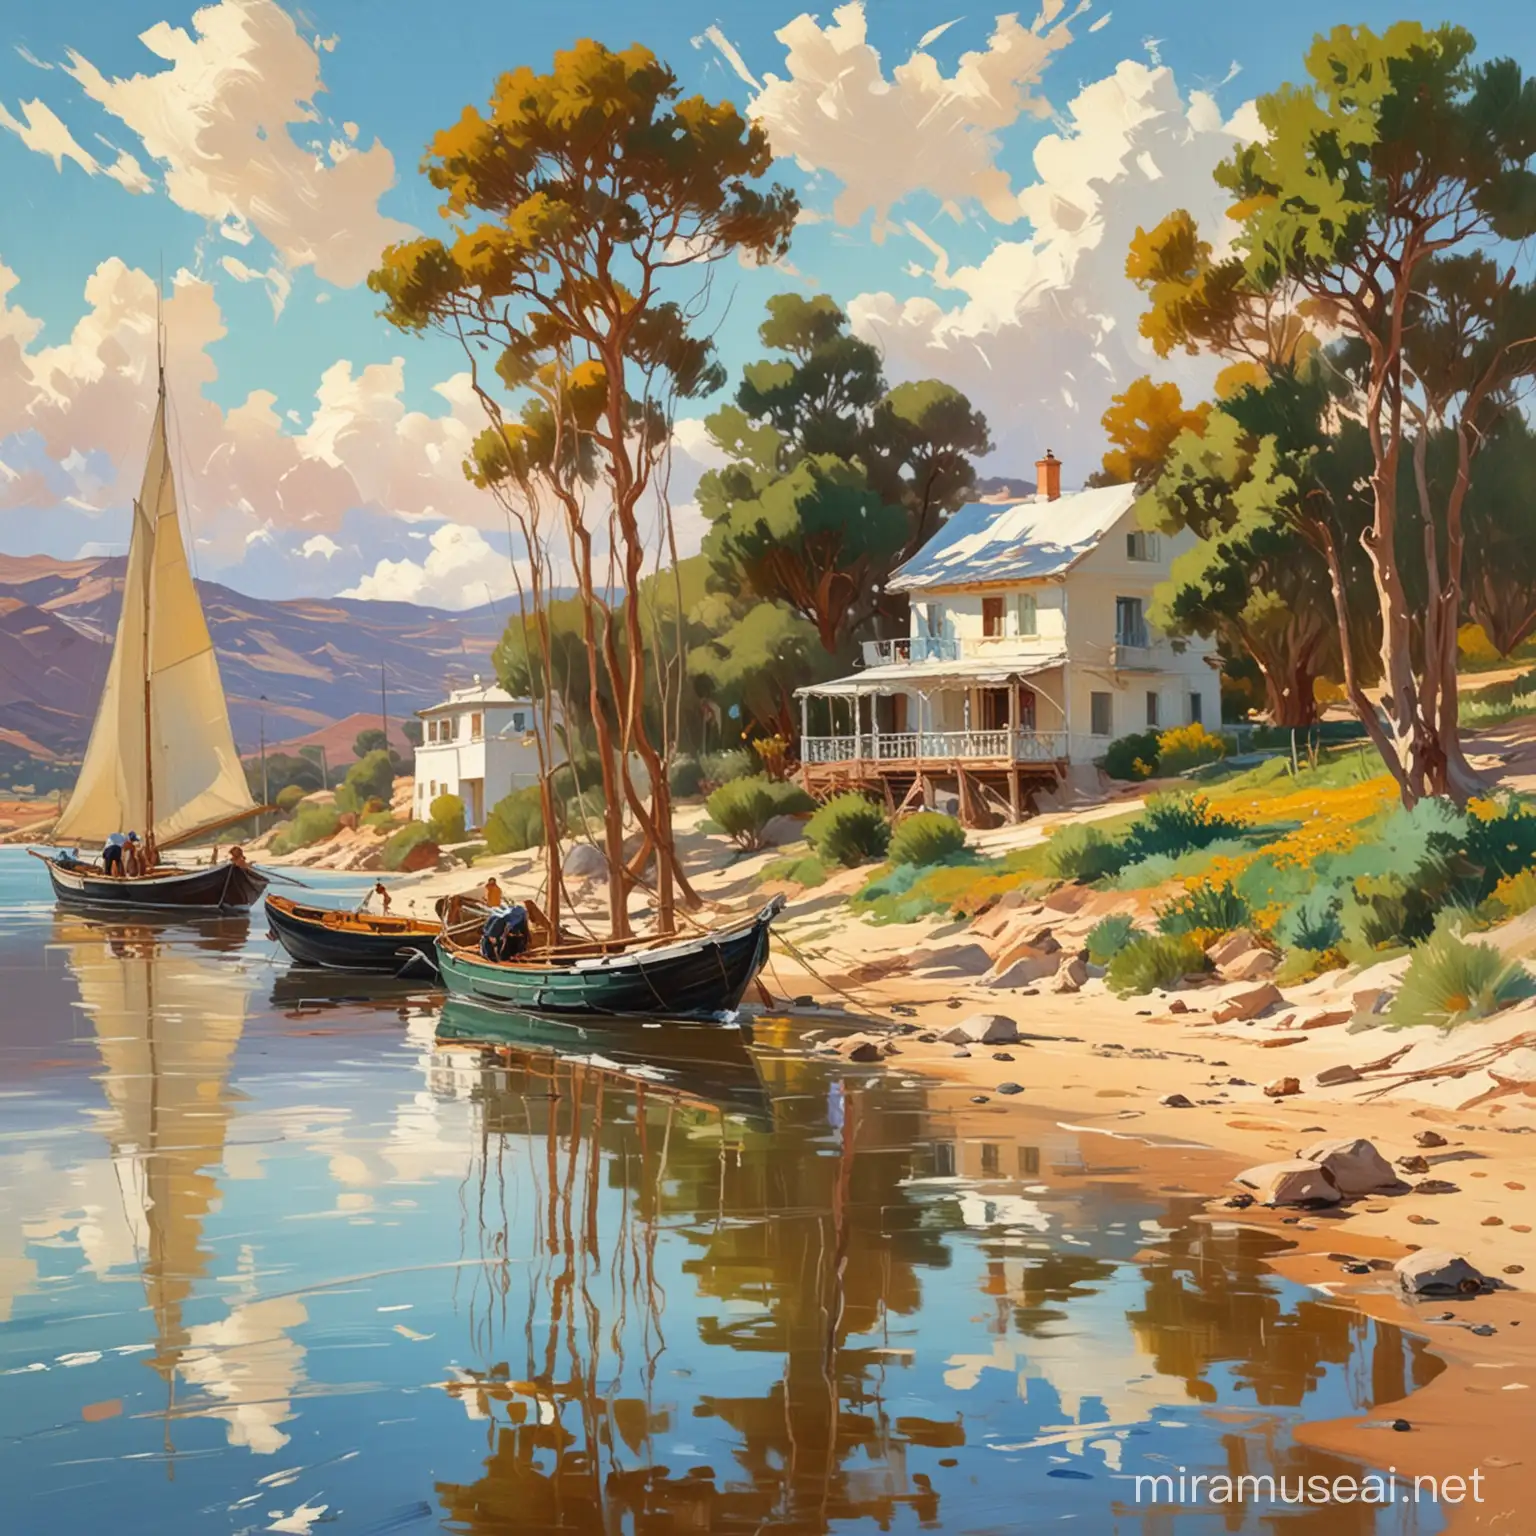 painting landscape in the style of Joaquín Sorolla, an epic painting, lighting, wind trees reflected in the water. By the river, there is a small house, boats, fishing nets drying on the shore, clouds, in the distance a sailing ship. in vector illustration

